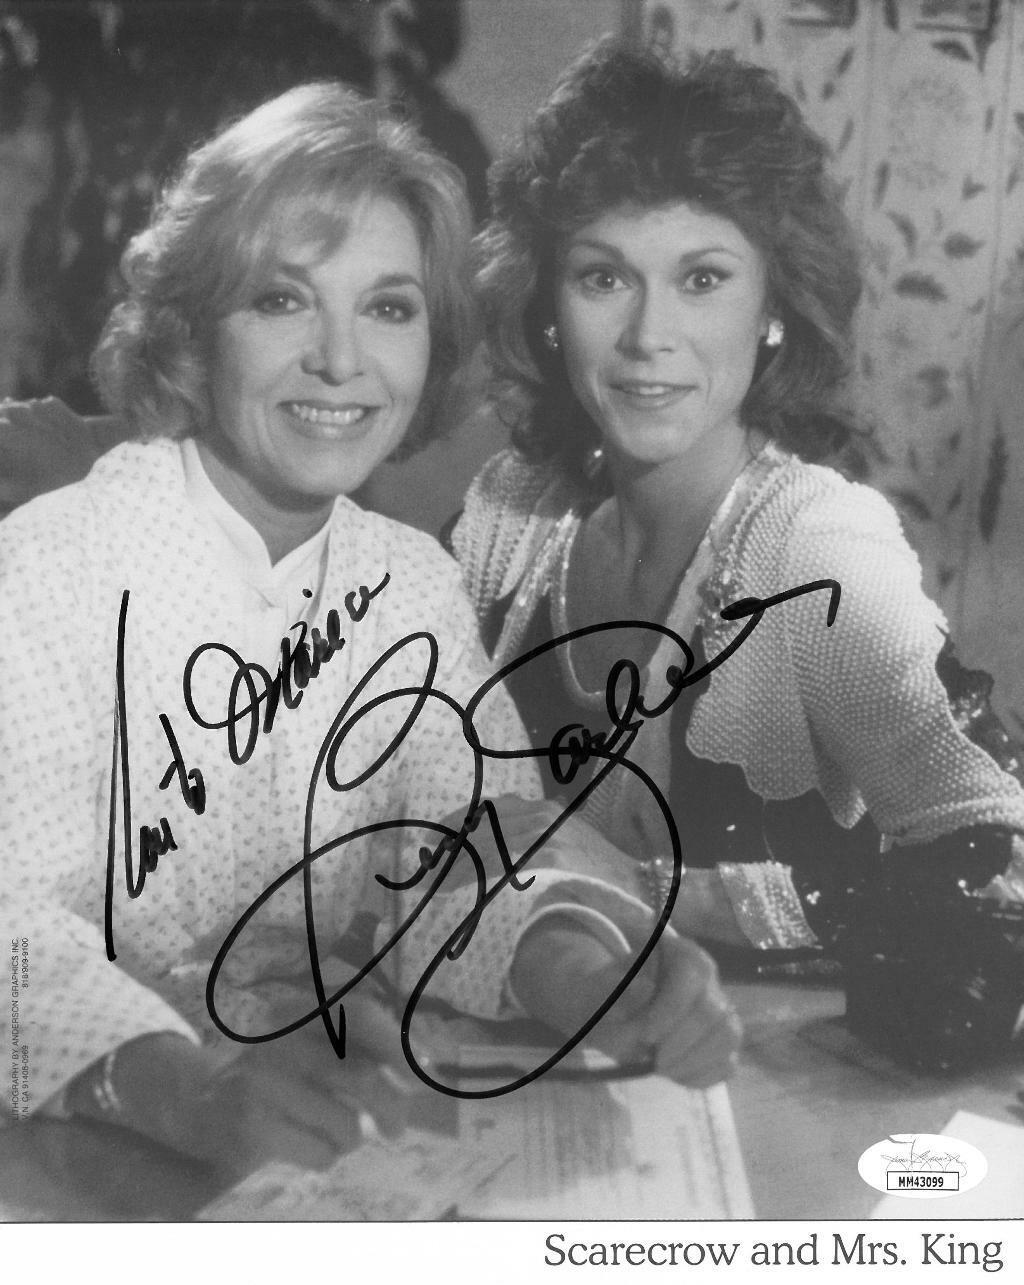 Beverly Garland Signed Scarecrow & Mrs. King Auto 8x10 B/W Photo Poster painting JSA #MM43099